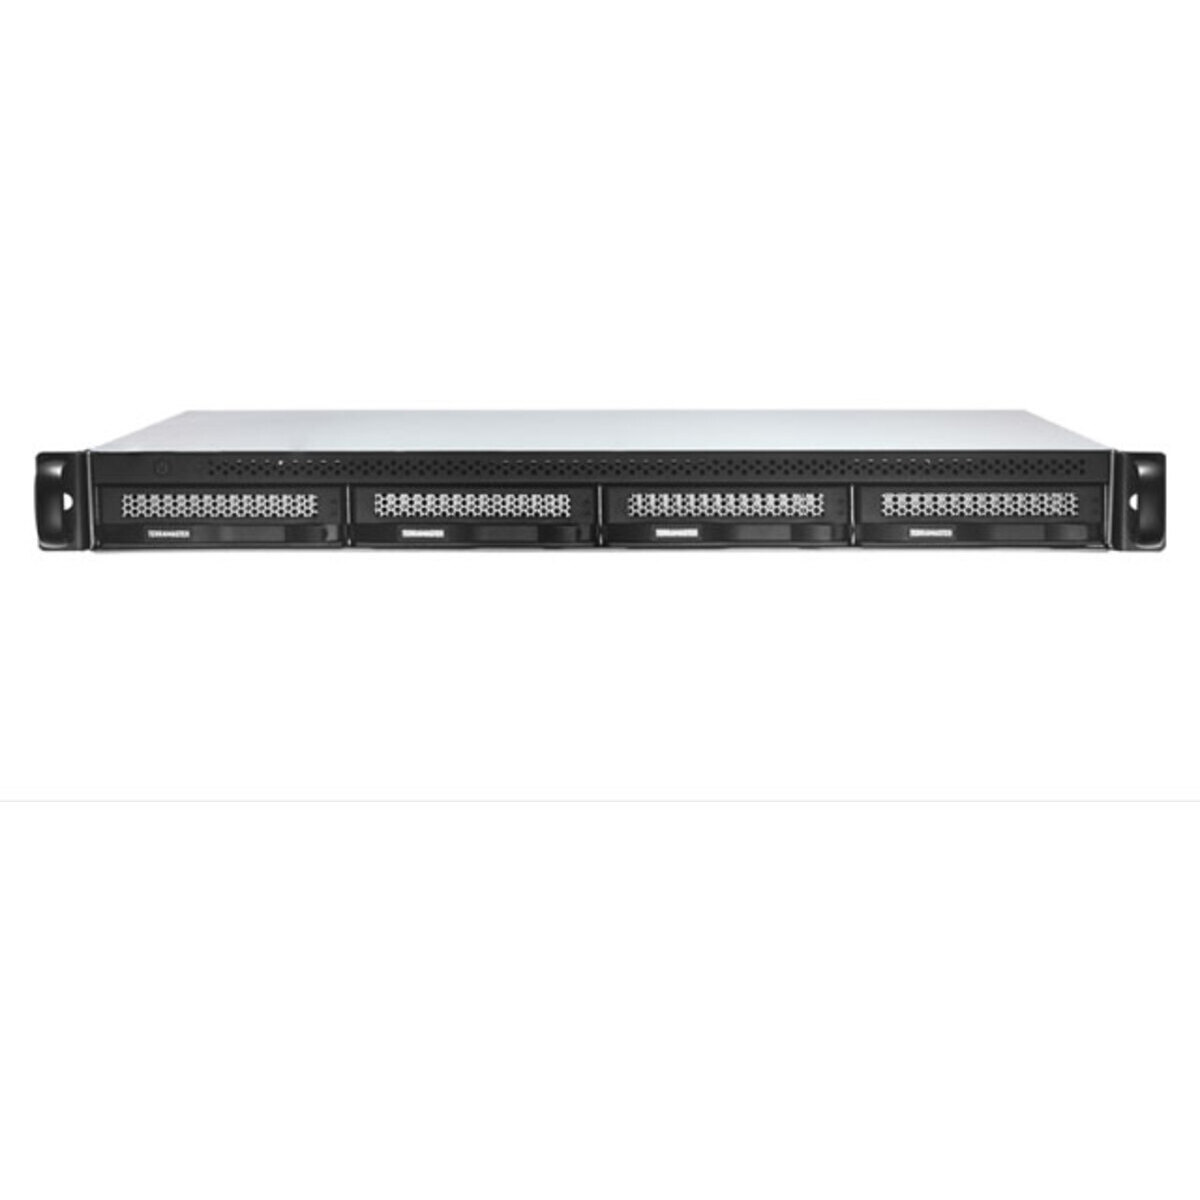 buy $1847 TerraMaster U4-423 8tb RackMount NAS - Network Attached Storage Device 4x2000gb Western Digital Red SA500 WDS200T1R0A 2.5 560/530MB/s SATA 6Gb/s SSD NAS Class Drives Installed - Burn-In Tested - FREE RAM UPGRADE - nas headquarters buy network attached storage server device das new raid-5 free shipping usa U4-423